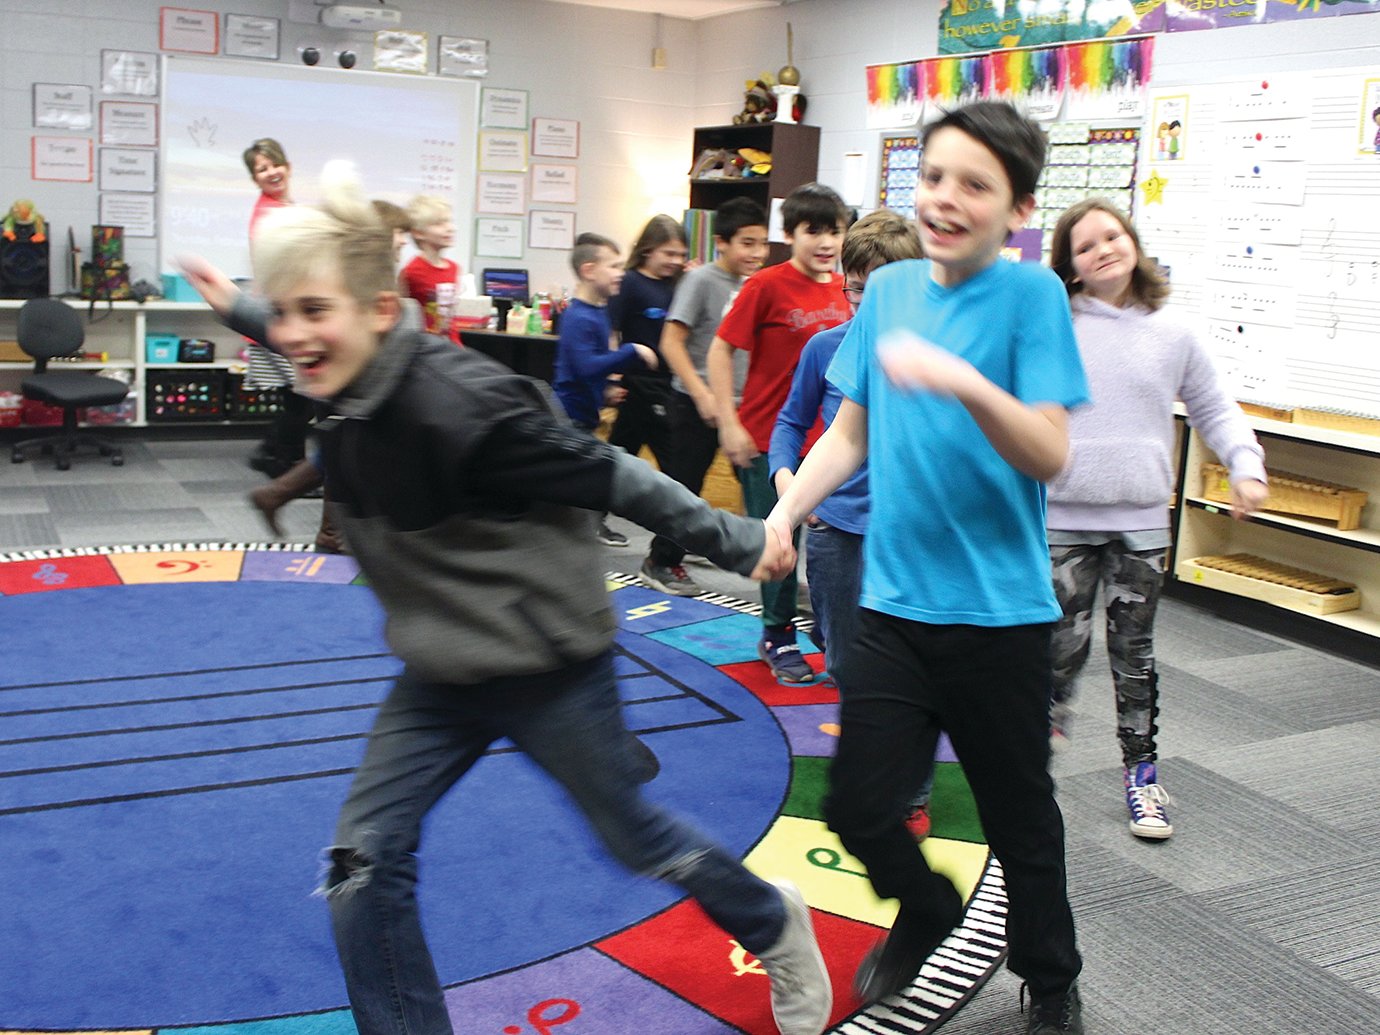 Collyn Stewart, left, and Jackson Brown run around the dancing circle Thursday in Jennifer Ellingwood's Ladoga Elementary music class as the music rapdily increases.